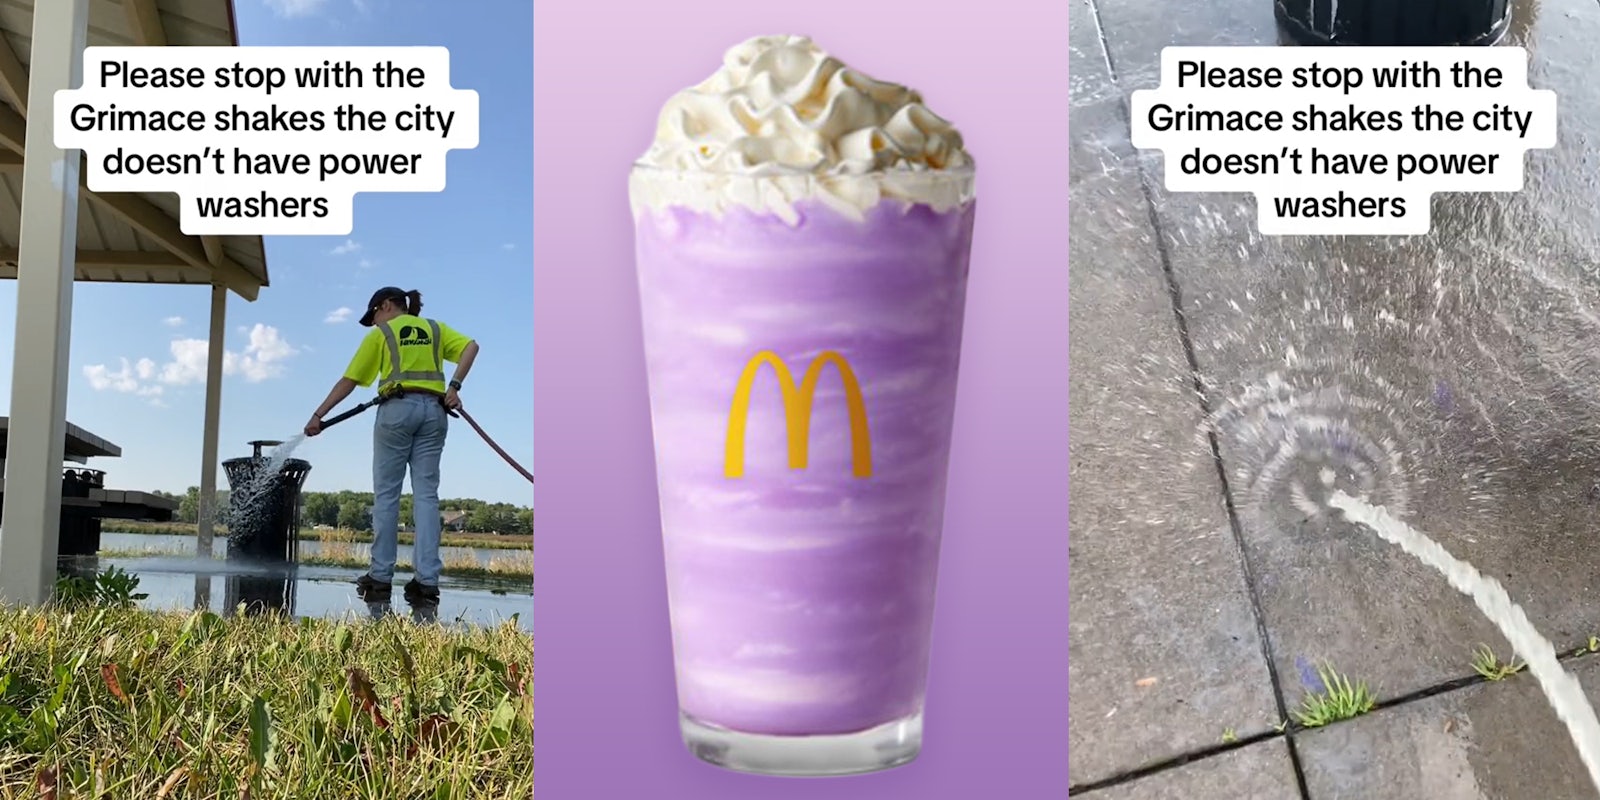 woman with hose with caption 'Please stop with the Grimace shakes the city doesn't have power washers' (l) Grimace shake in front of purple background (c) woman with hose with caption 'Please stop with the Grimace shakes the city doesn't have power washers' (r)